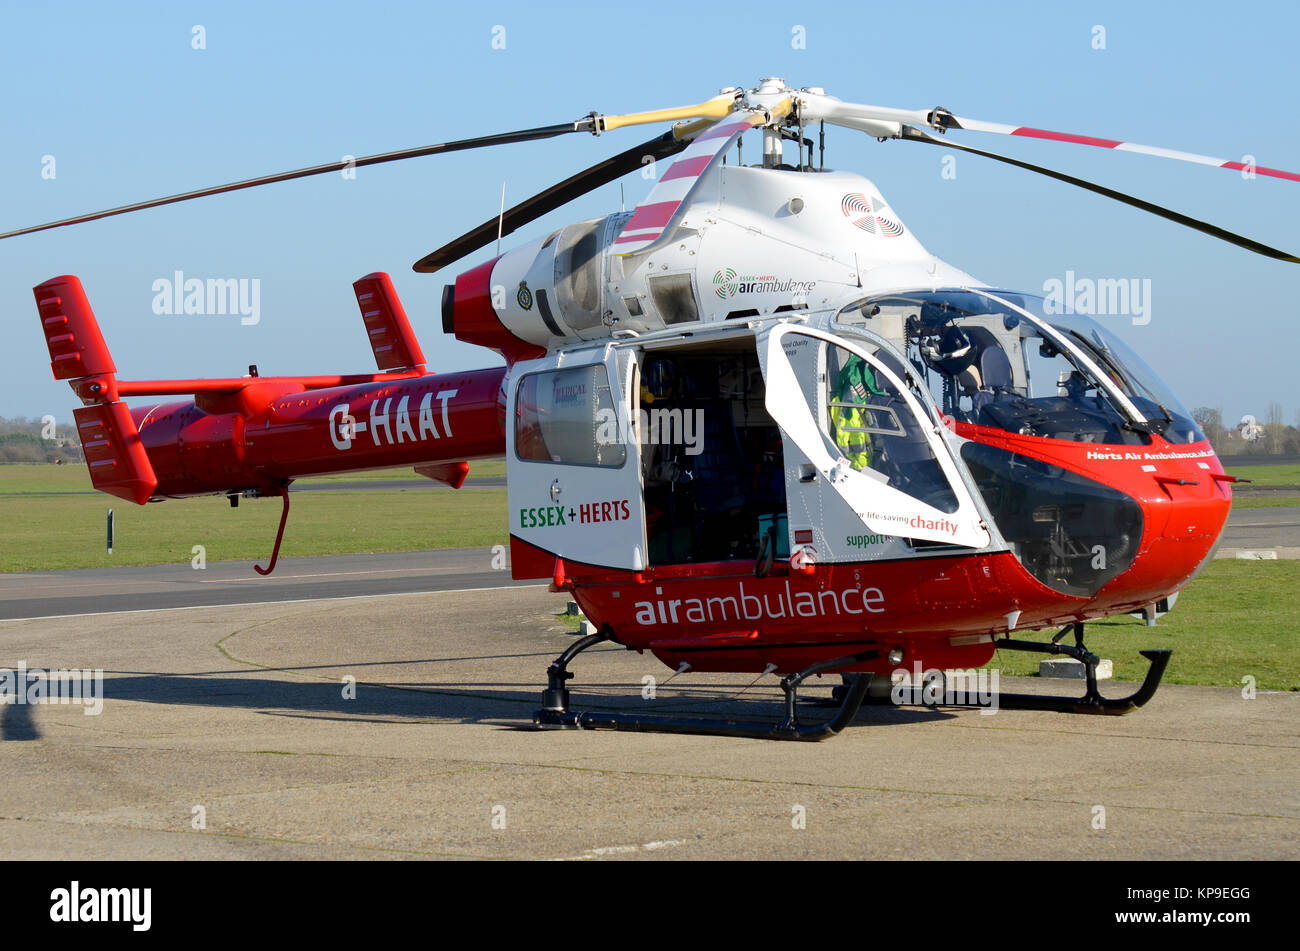 Essex and Herts Air Ambulance MD 900 Explorer G-HAAT helicopter sitting ready on alert at North Weald Airfield, Essex, UK Stock Photo